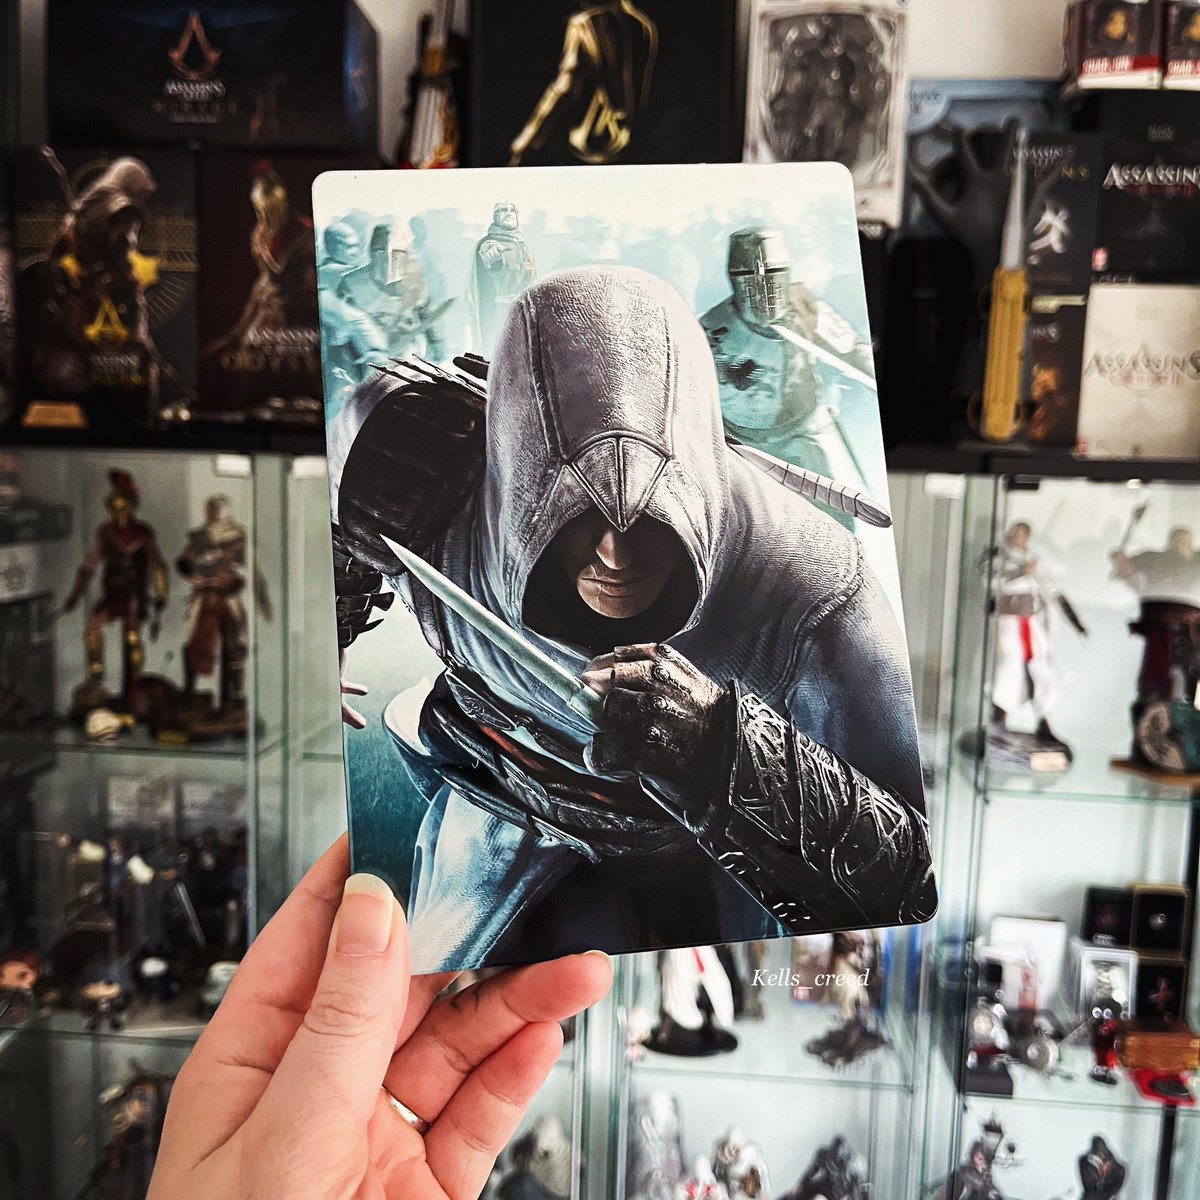 Goodmorning Assassins🖤 It’s #RemakeAC1 Day🔥 Another reason why I want that remake is that I would love to add another amazing AC1 steelbook to my collection😋 Assassin’s Creed steelbooks are soo cool🤩 #AssassinsCreed #AC1